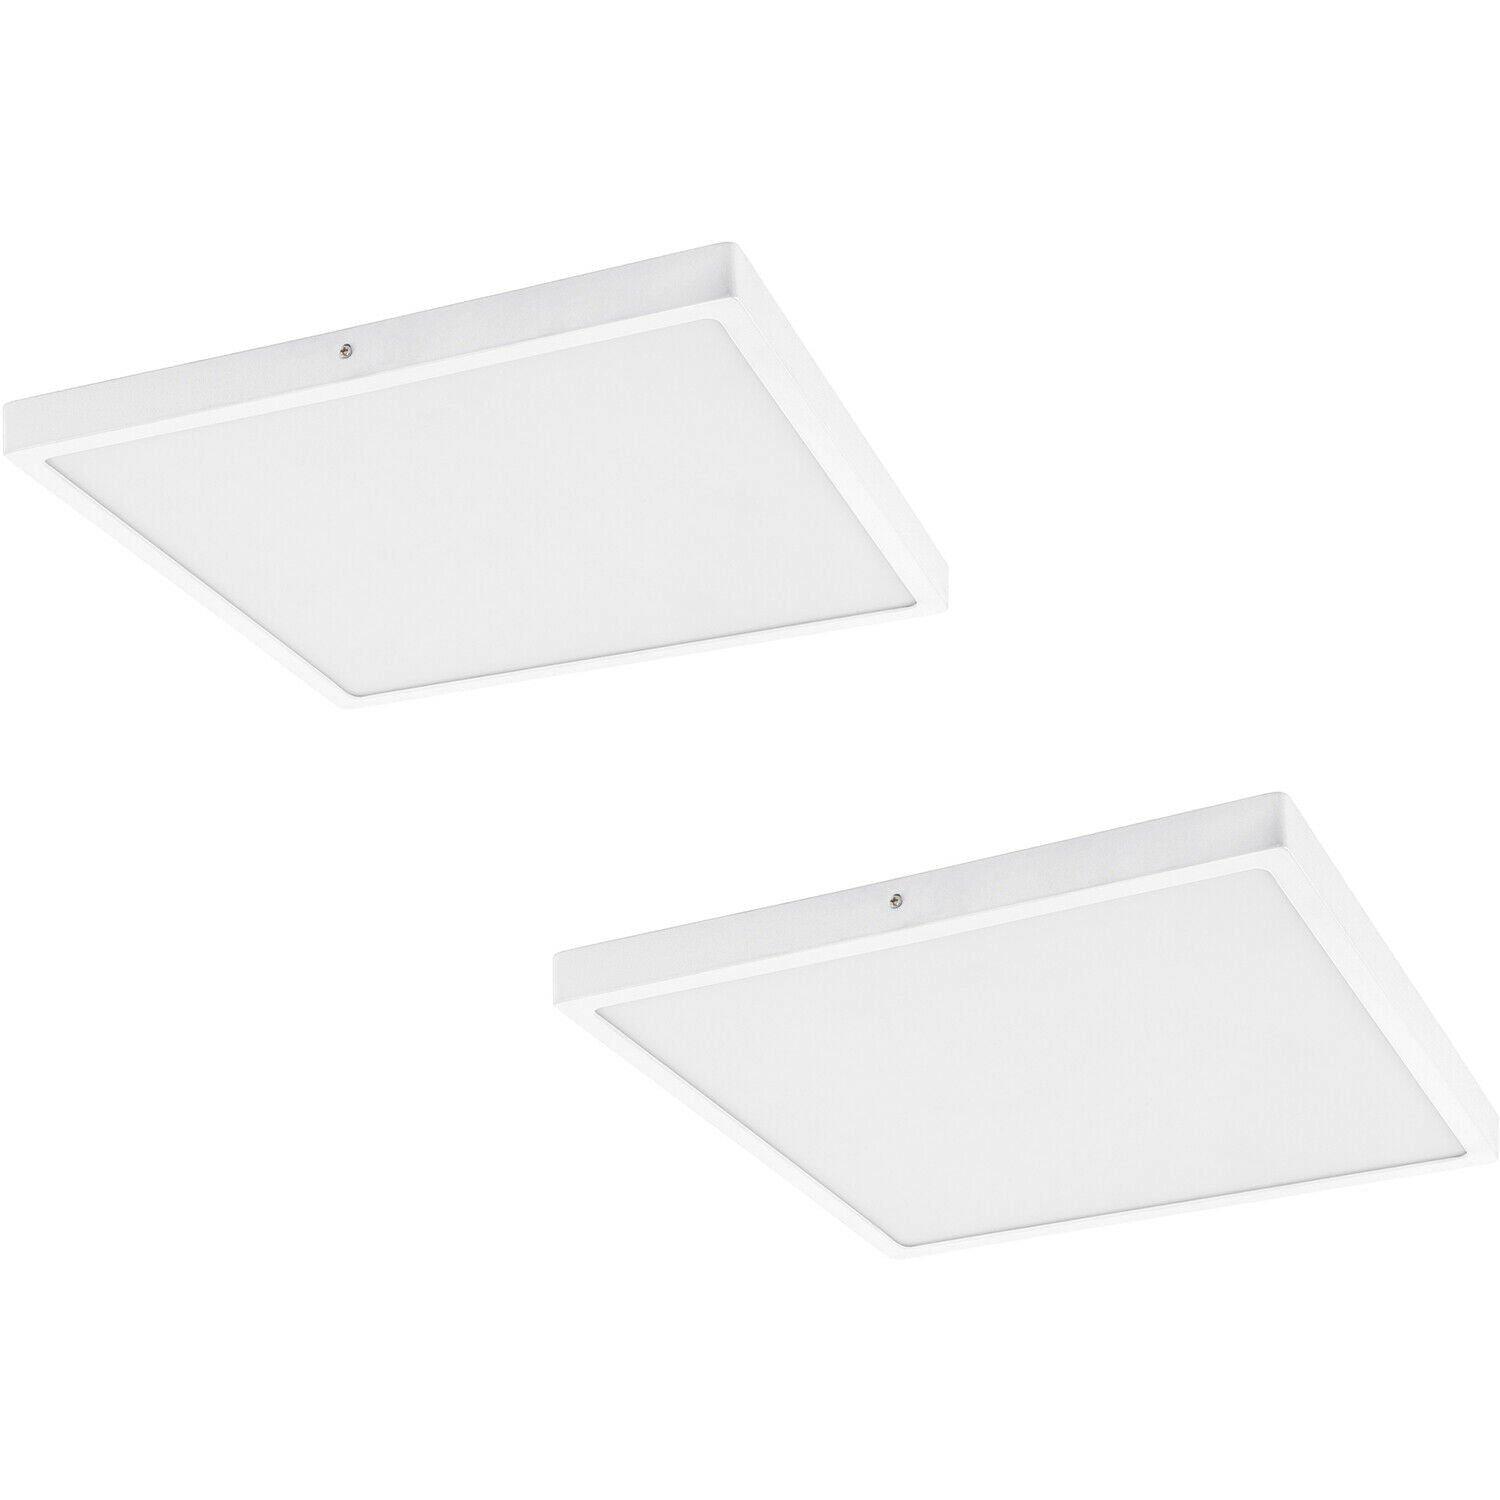 2 PACK Wall / Ceiling Light White 400mm Square Surface Mounted 25W LED 4000K